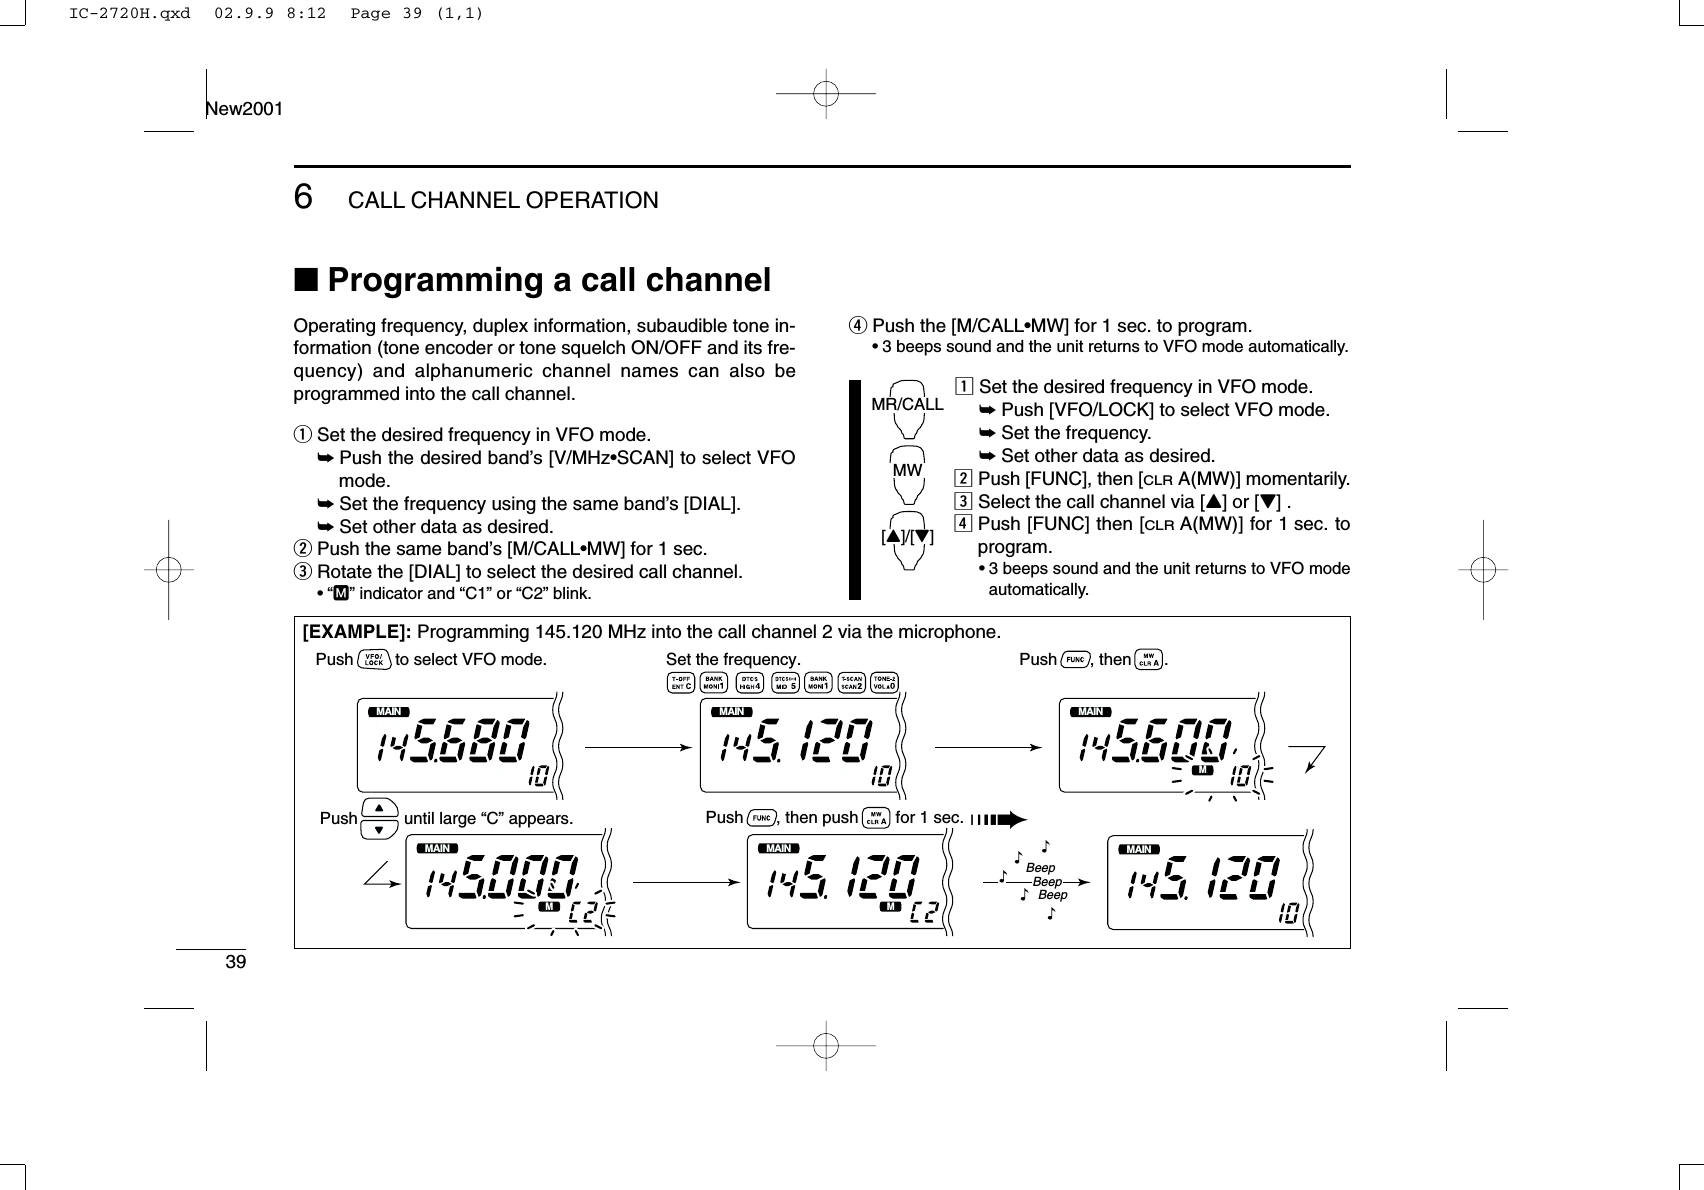 396CALL CHANNEL OPERATIONNew2001■Programming a call channelOperating frequency, duplex information, subaudible tone in-formation (tone encoder or tone squelch ON/OFF and its fre-quency) and alphanumeric channel names can also beprogrammed into the call channel.qSet the desired frequency in VFO mode.➥Push the desired band’s [V/MHz•SCAN] to select VFOmode.➥Set the frequency using the same band’s [DIAL].➥Set other data as desired.wPush the same band’s [M/CALL•MW] for 1 sec.eRotate the [DIAL] to select the desired call channel.•“M” indicator and “C1” or “C2” blink.rPush the [M/CALL•MW] for 1 sec. to program.•3 beeps sound and the unit returns to VFO mode automatically.zSet the desired frequency in VFO mode.➥Push [VFO/LOCK] to select VFO mode.➥Set the frequency.➥Set other data as desired.xPush [FUNC], then [CLRA(MW)] momentarily.cSelect the call channel via [Y] or [Z] .vPush [FUNC] then [CLRA(MW)] for 1 sec. toprogram.•3 beeps sound and the unit returns to VFO modeautomatically.MR/CALLMW[Y]/[Z][EXAMPLE]: Programming 145.120 MHz into the call channel 2 via the microphone.MAINT  XMMAINT  XMMAINT  XMMAINT  XMMAINT  XMMAINT  XMSet the frequency.Push         to select VFO mode. Push       , then       .Push       , then push        for 1 sec. ➠Push          until large “C” appears.BeepBeepBeep“““““IC-2720H.qxd  02.9.9 8:12  Page 39 (1,1)